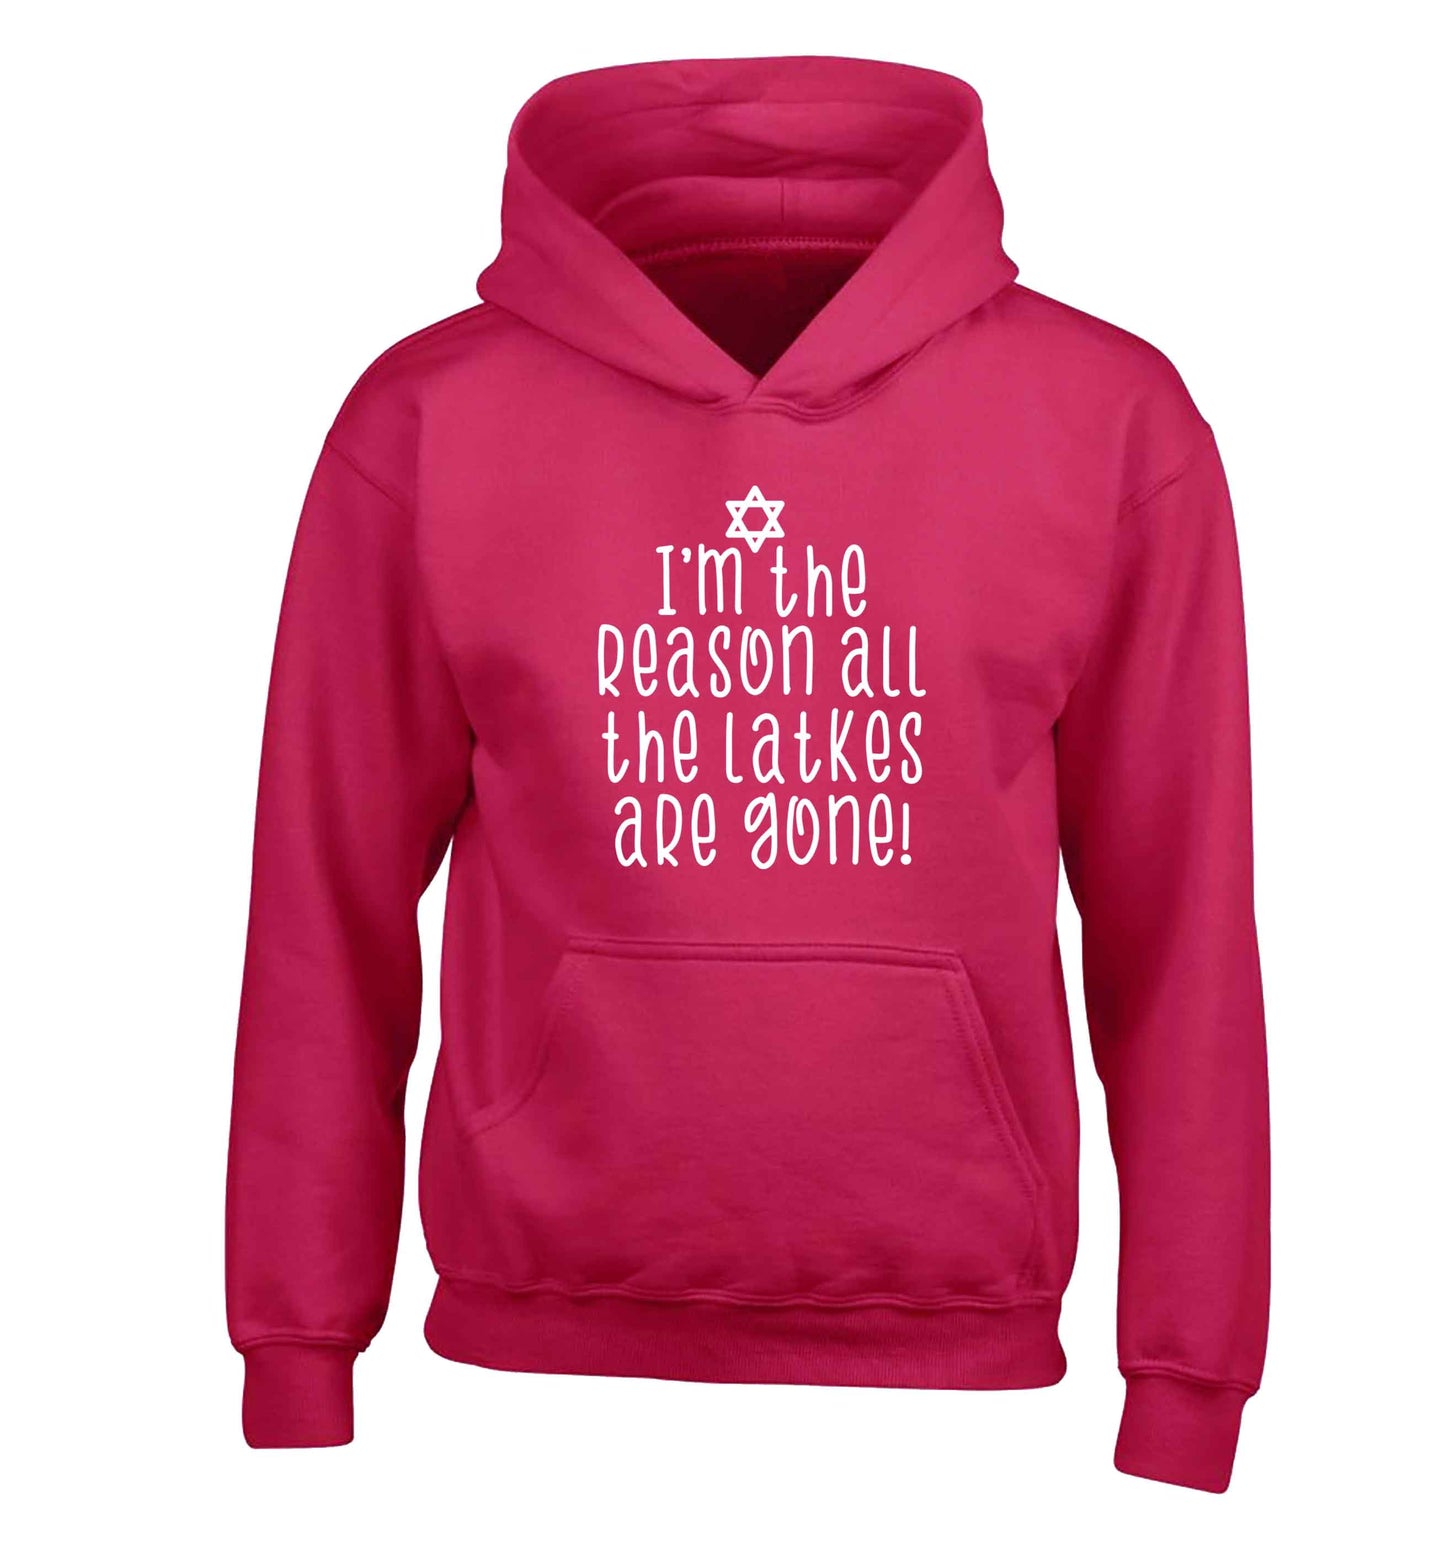 I'm the reason all the latkes are gone children's pink hoodie 12-13 Years